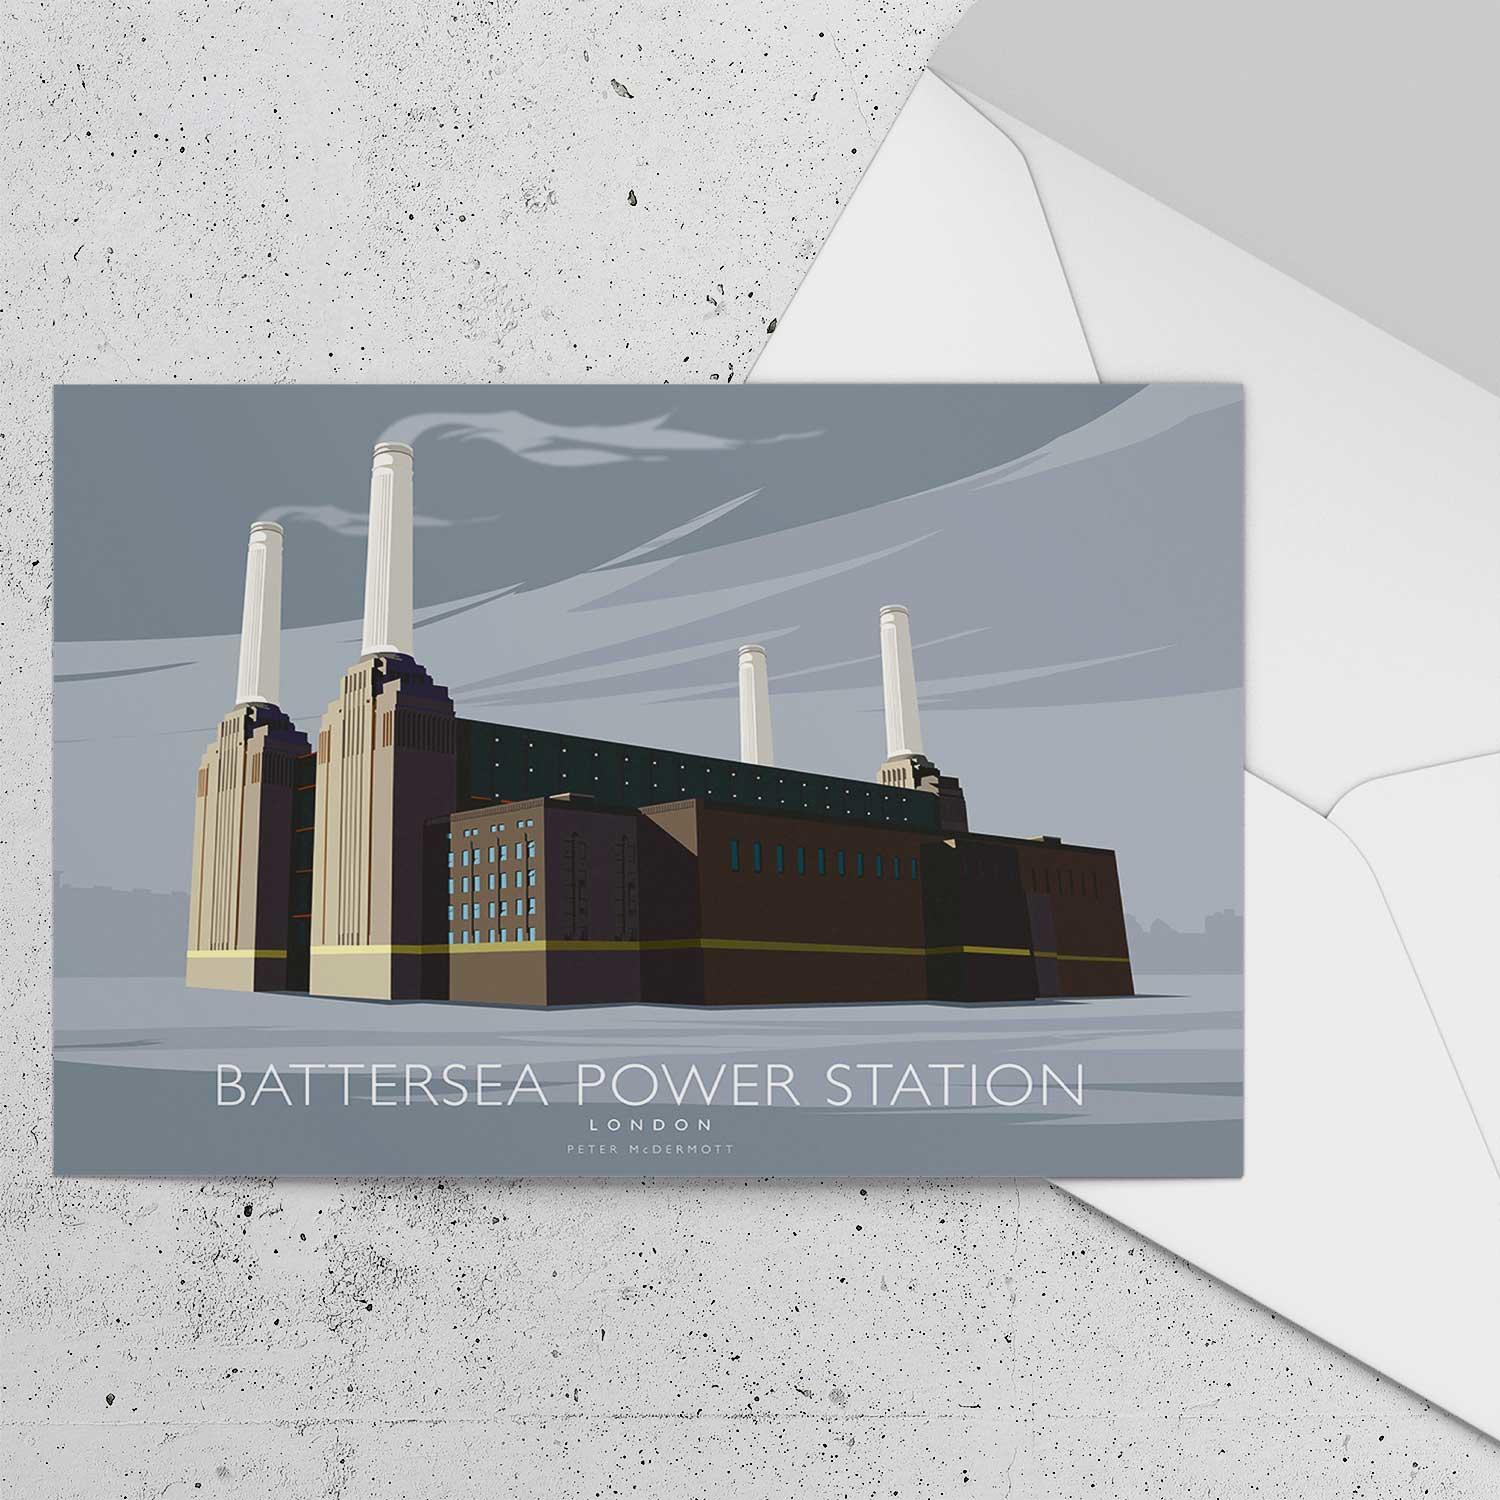 Battersea Power Station Greeting Card from an original painting by artist Peter McDermott